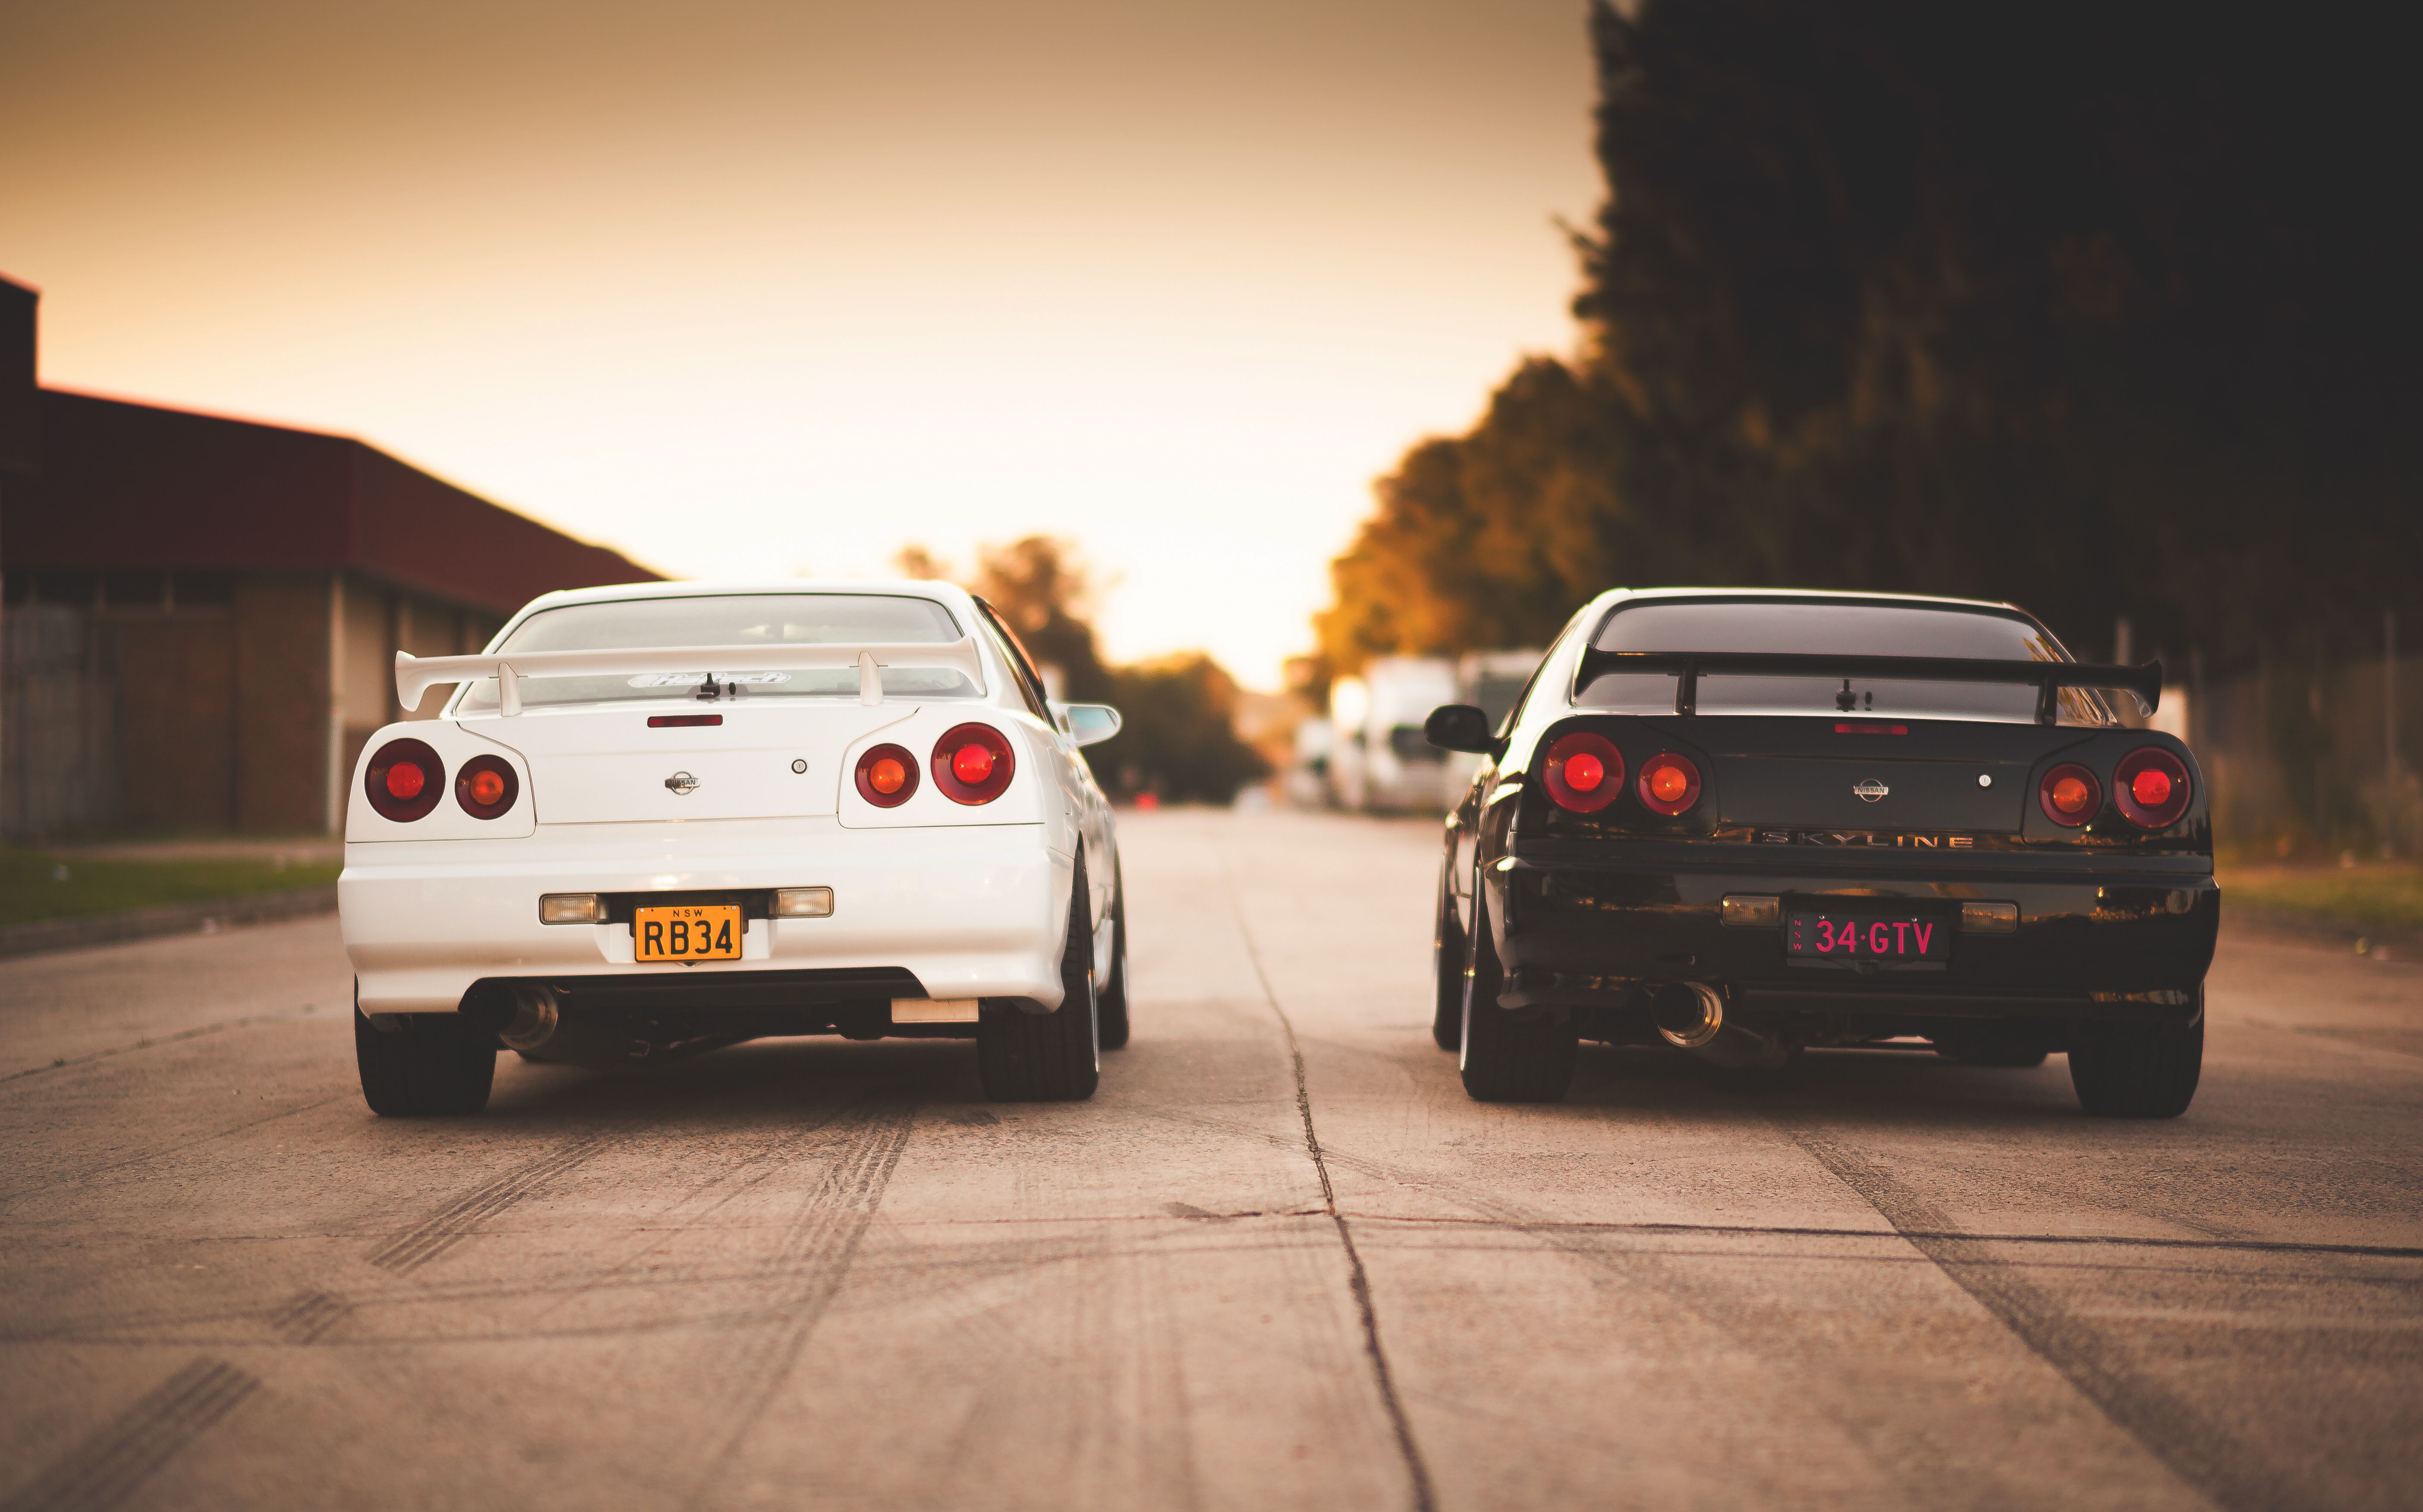 Two Nissan Skyline R34 GTVs, one white and one black, facing each other on the road - Nissan Skyline